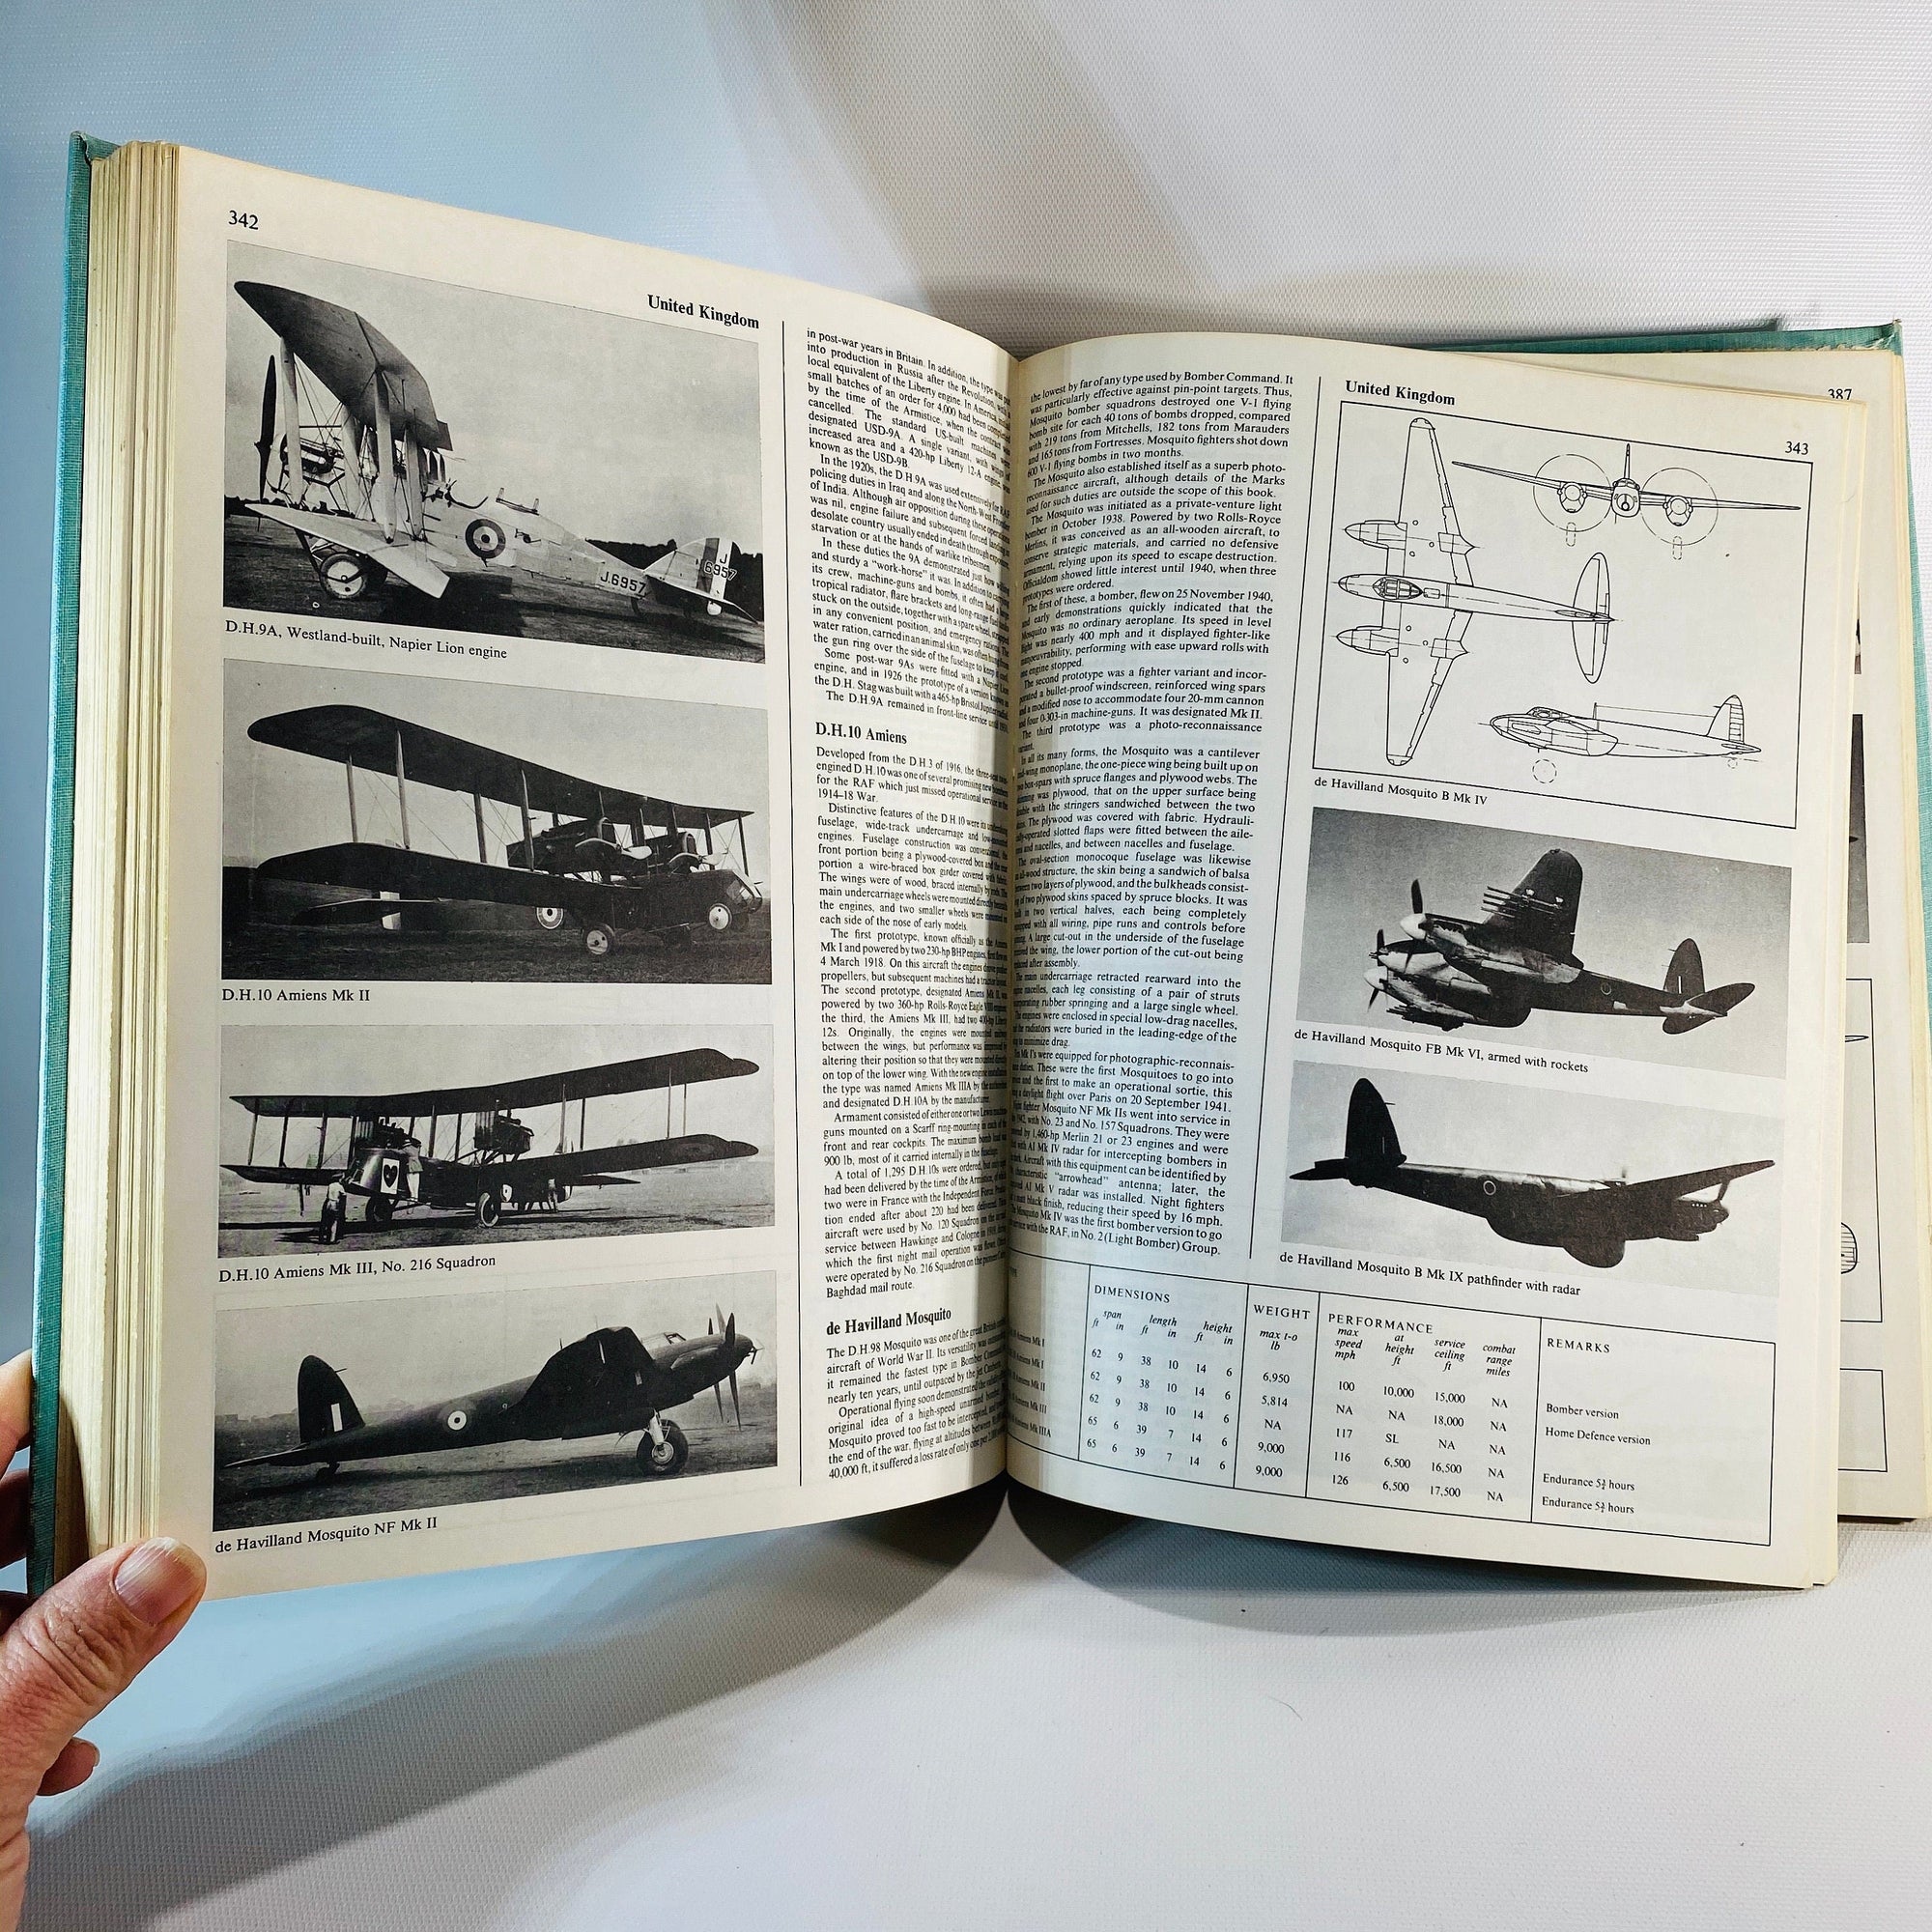 Combat Aircraft of the World from 1909 to Present by John W.R. Taylor 1969 Vintage Book